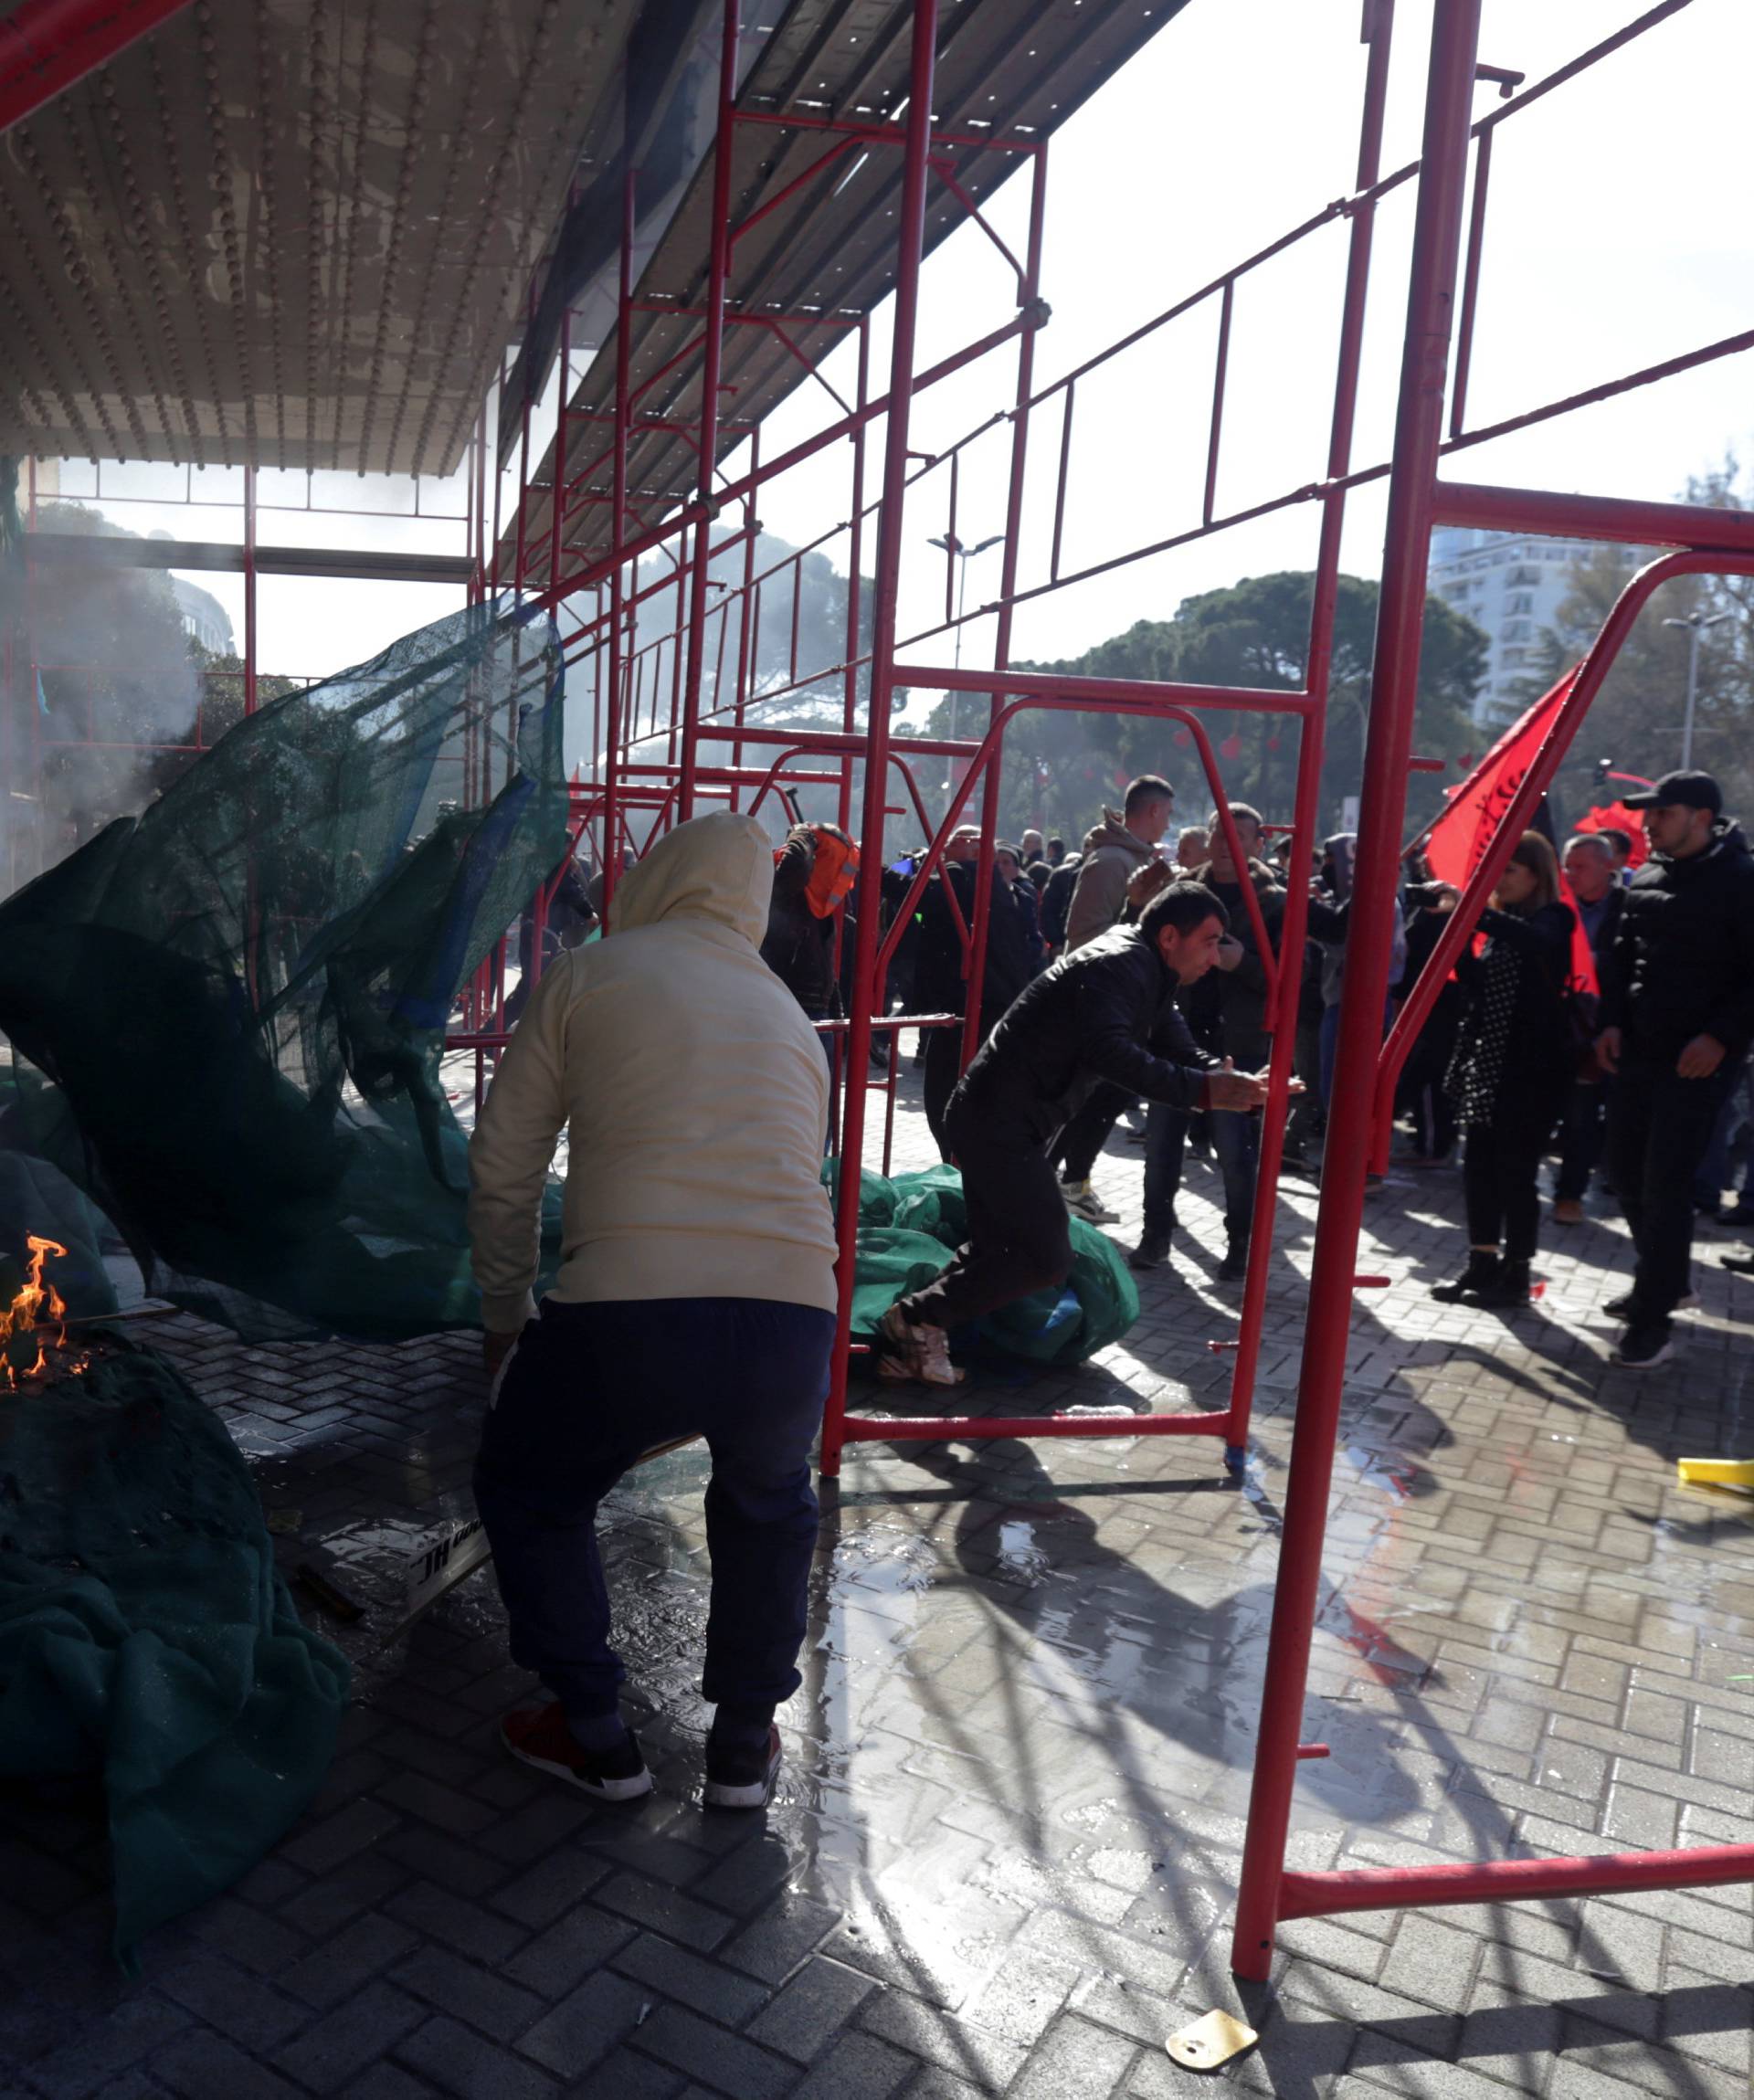 Albanian protesters try to break into government building